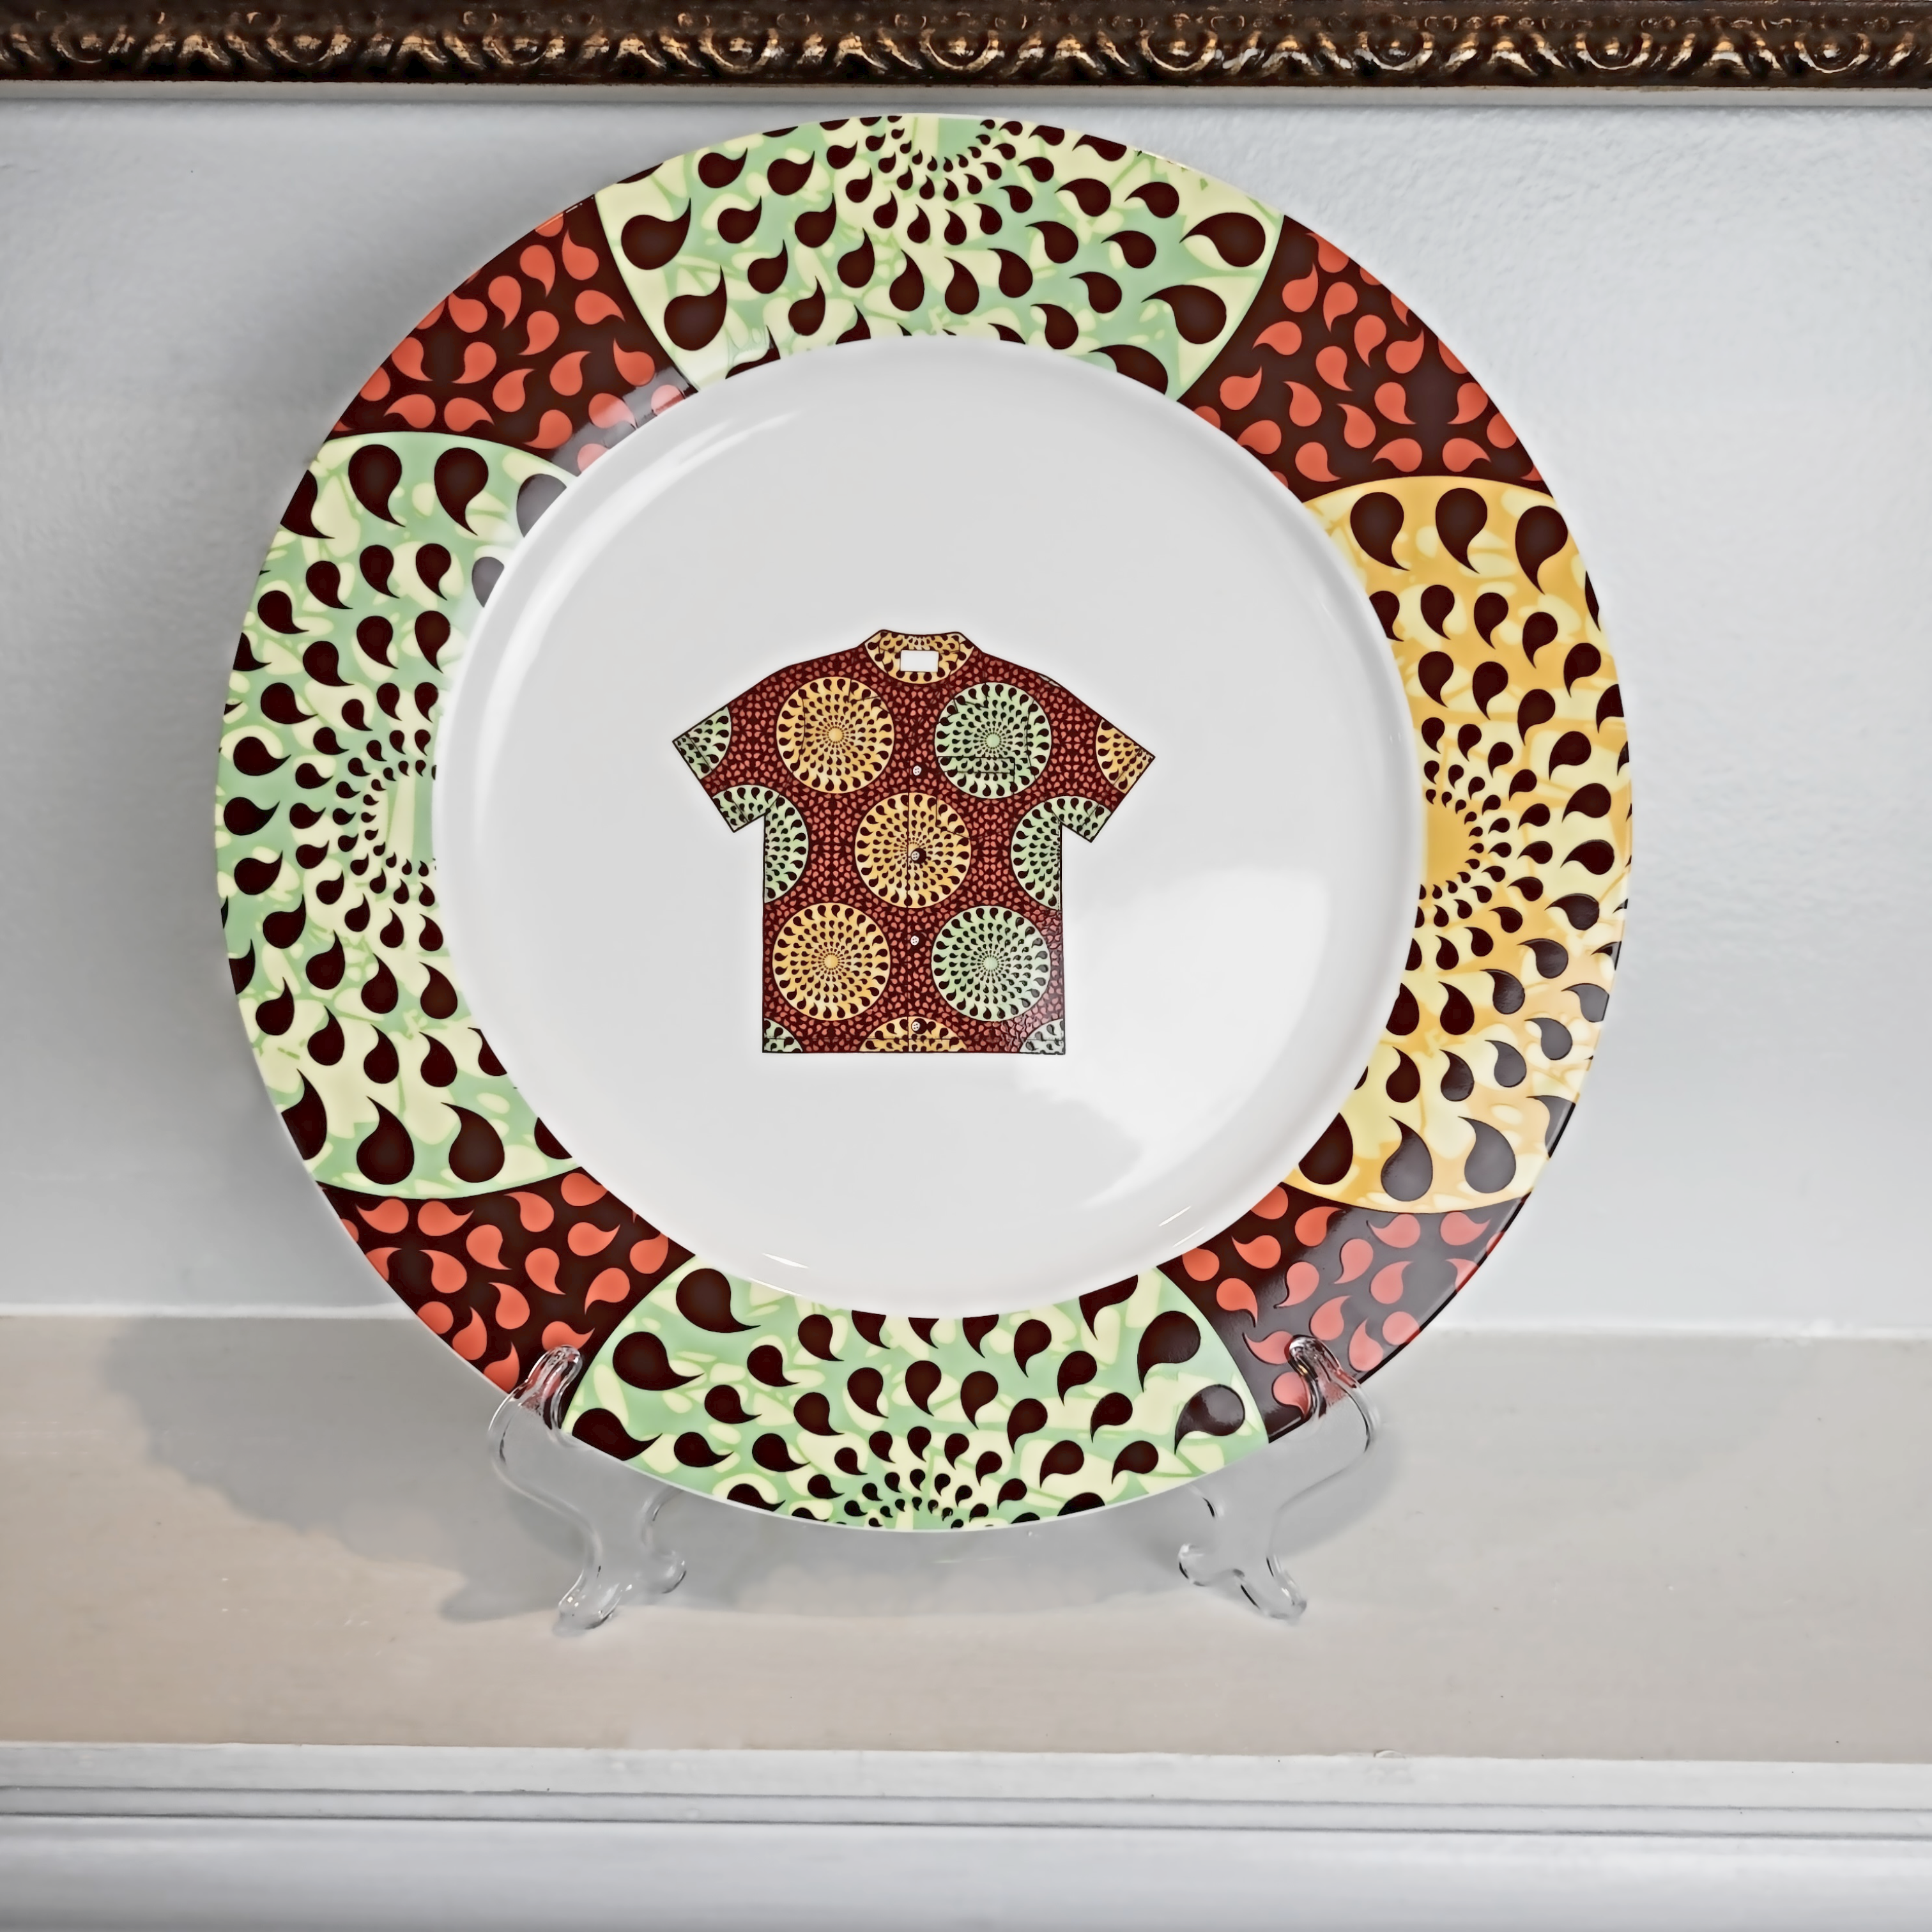 Colorful and beautilful African art dinner plate with African art in paisley pattern around its rim. In the center of the plate is an African shirt with the same paisley artwork on it.